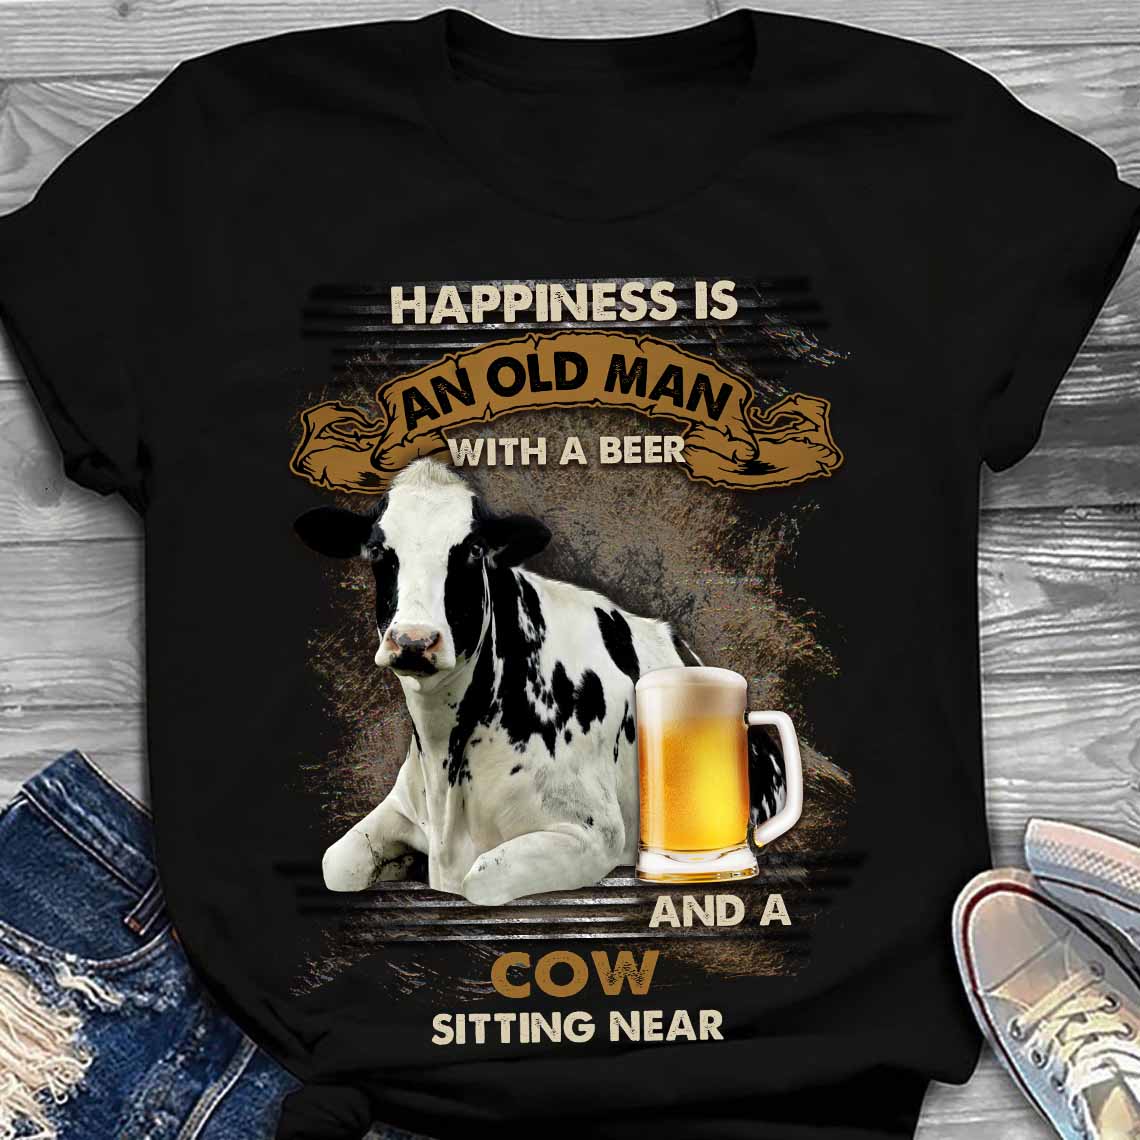 Happiness is an old man with a beer and a cow sitting near - Beer lover, cow and beer